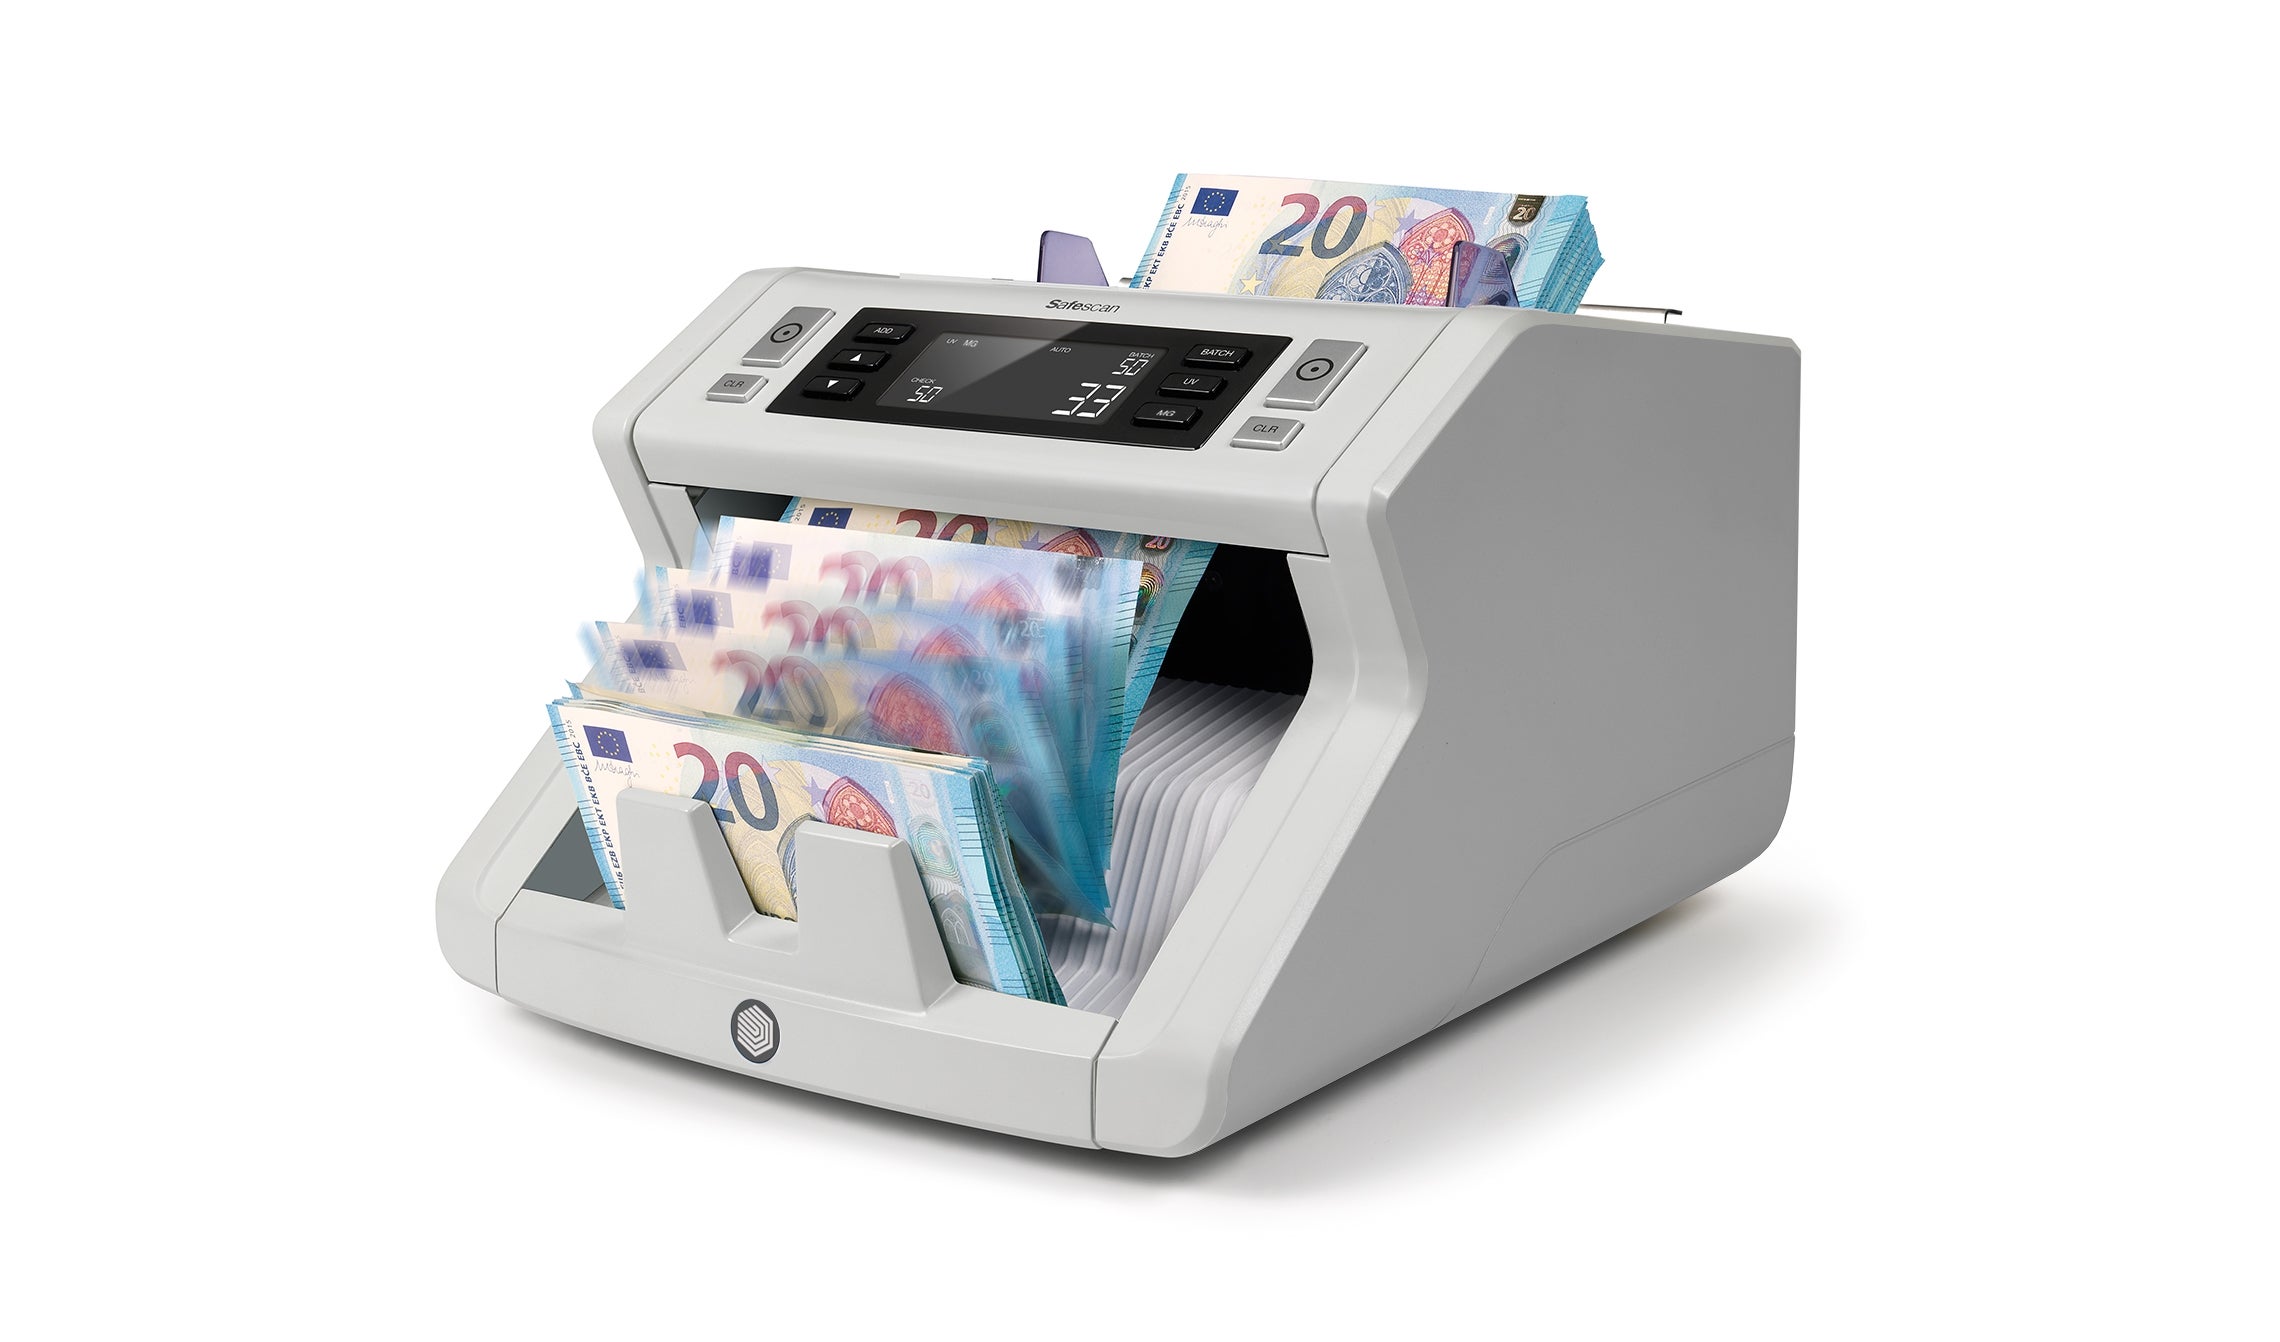 Banknote Counter - Safescan 2250 - Start Counting! | Safescan.com